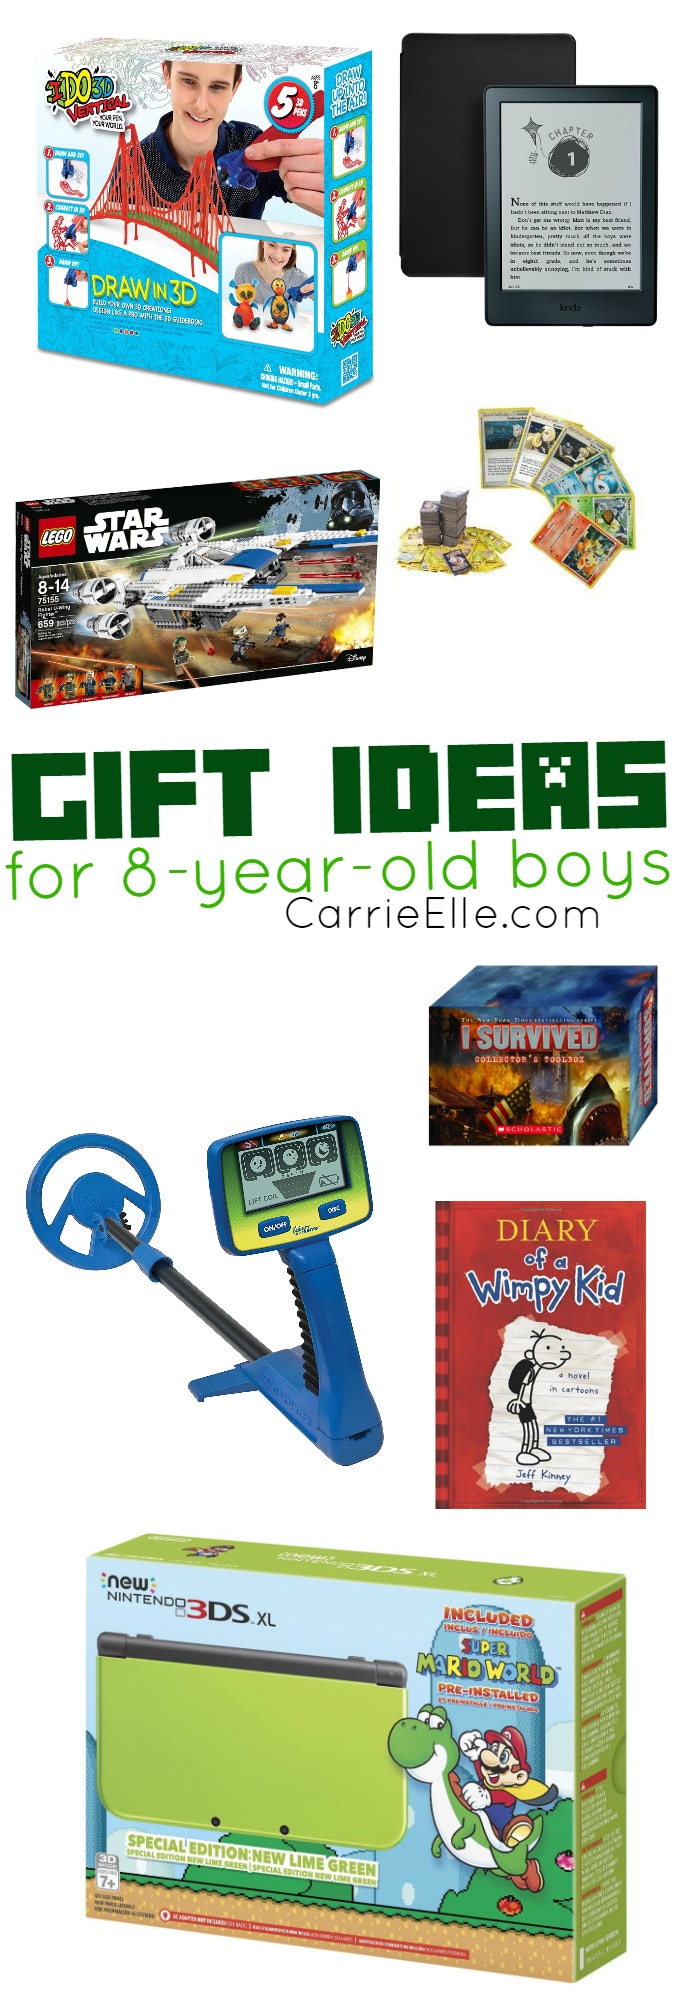 Gift Ideas for 8-Year-Old Boys